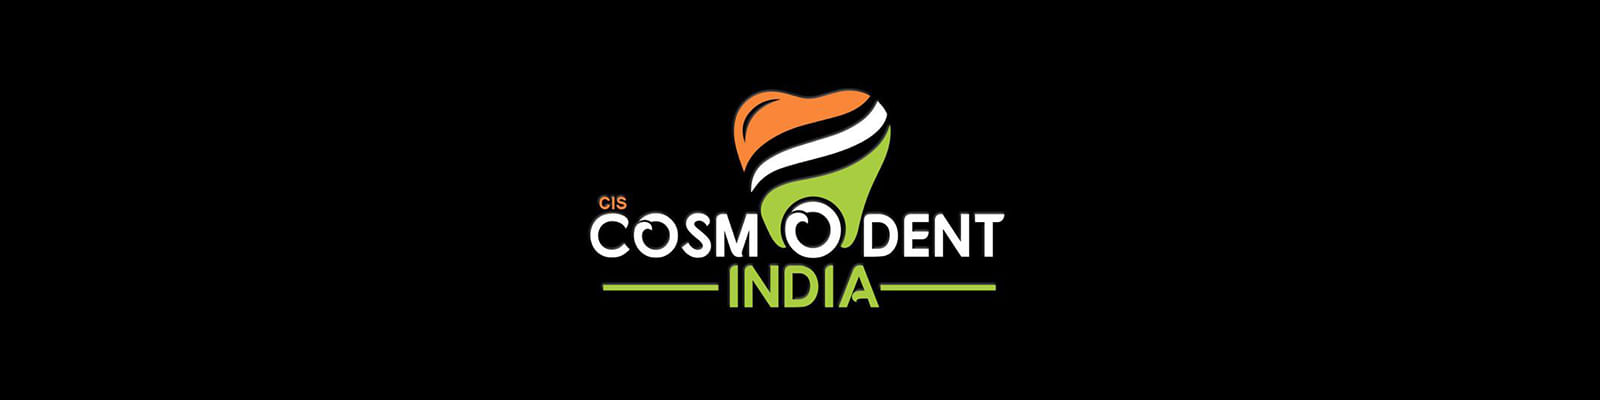 Cosmodent India